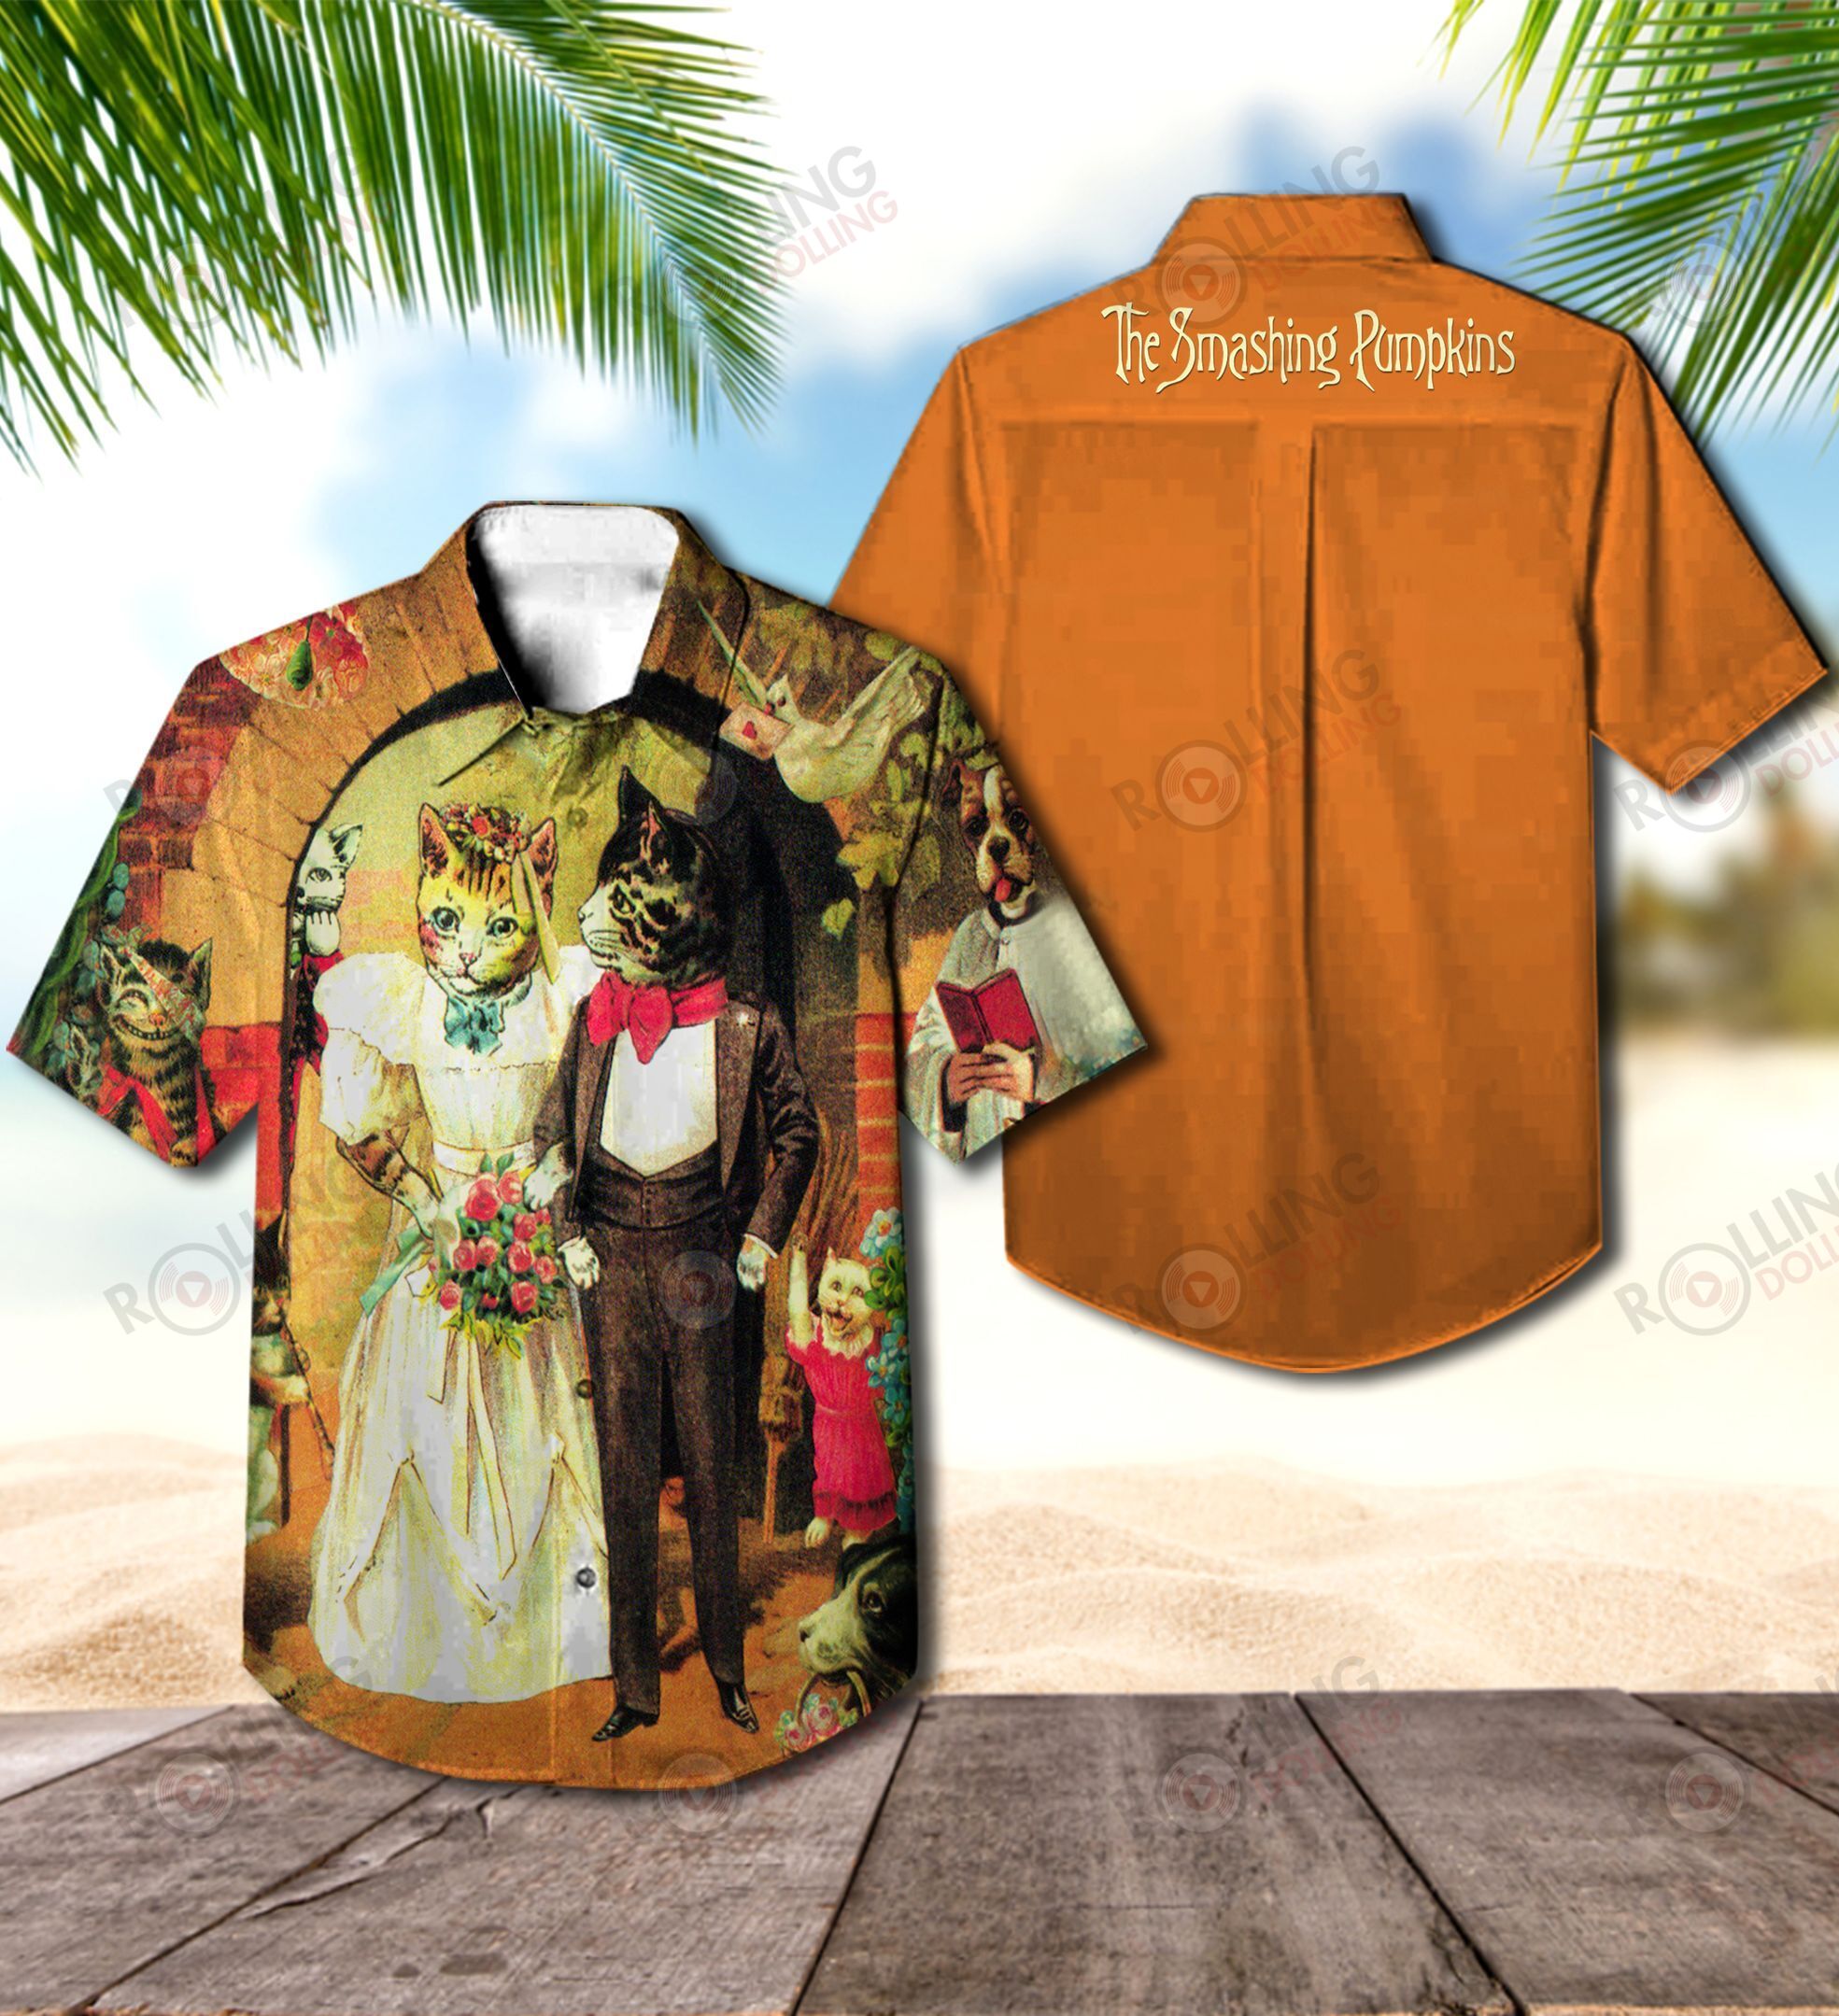 We have compiled a list of some of the best Hawaiian shirt that are available 241